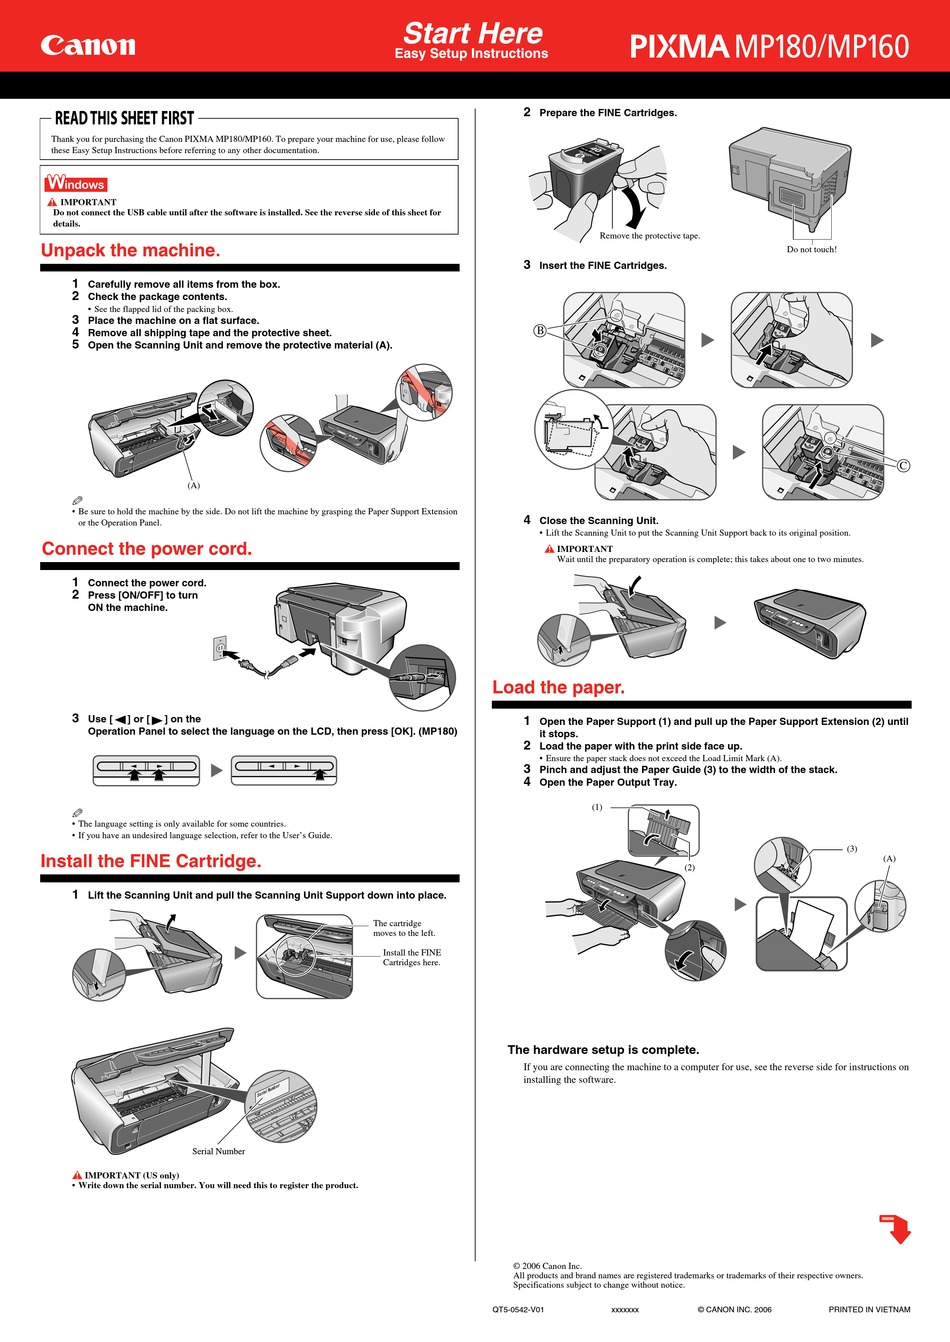 canon mp160 manual how to clean machine